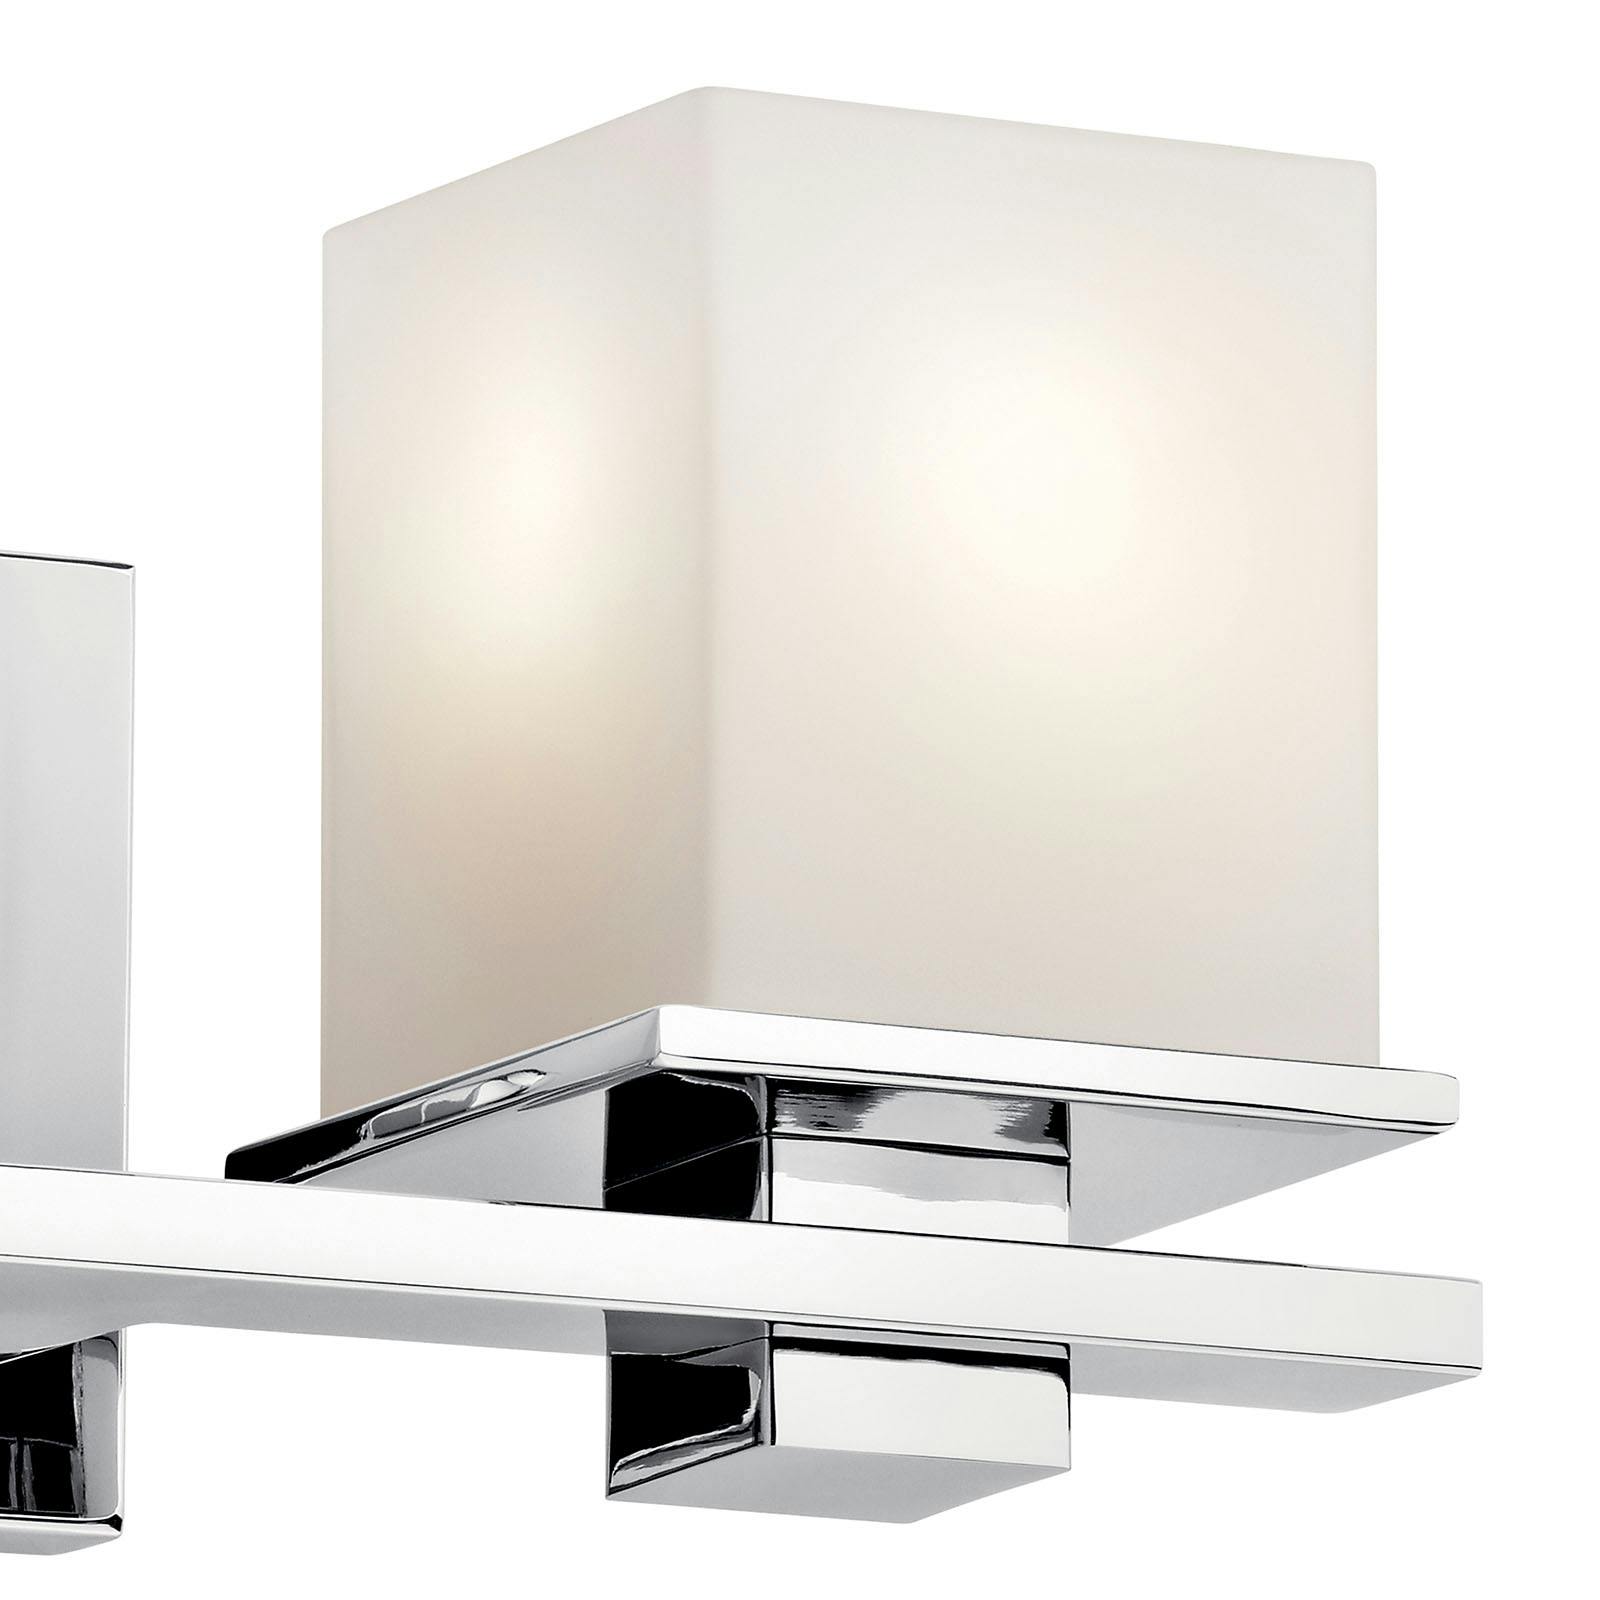 Close up view of the Tully 15" 2 Light Vanity Light Chrome on a white background